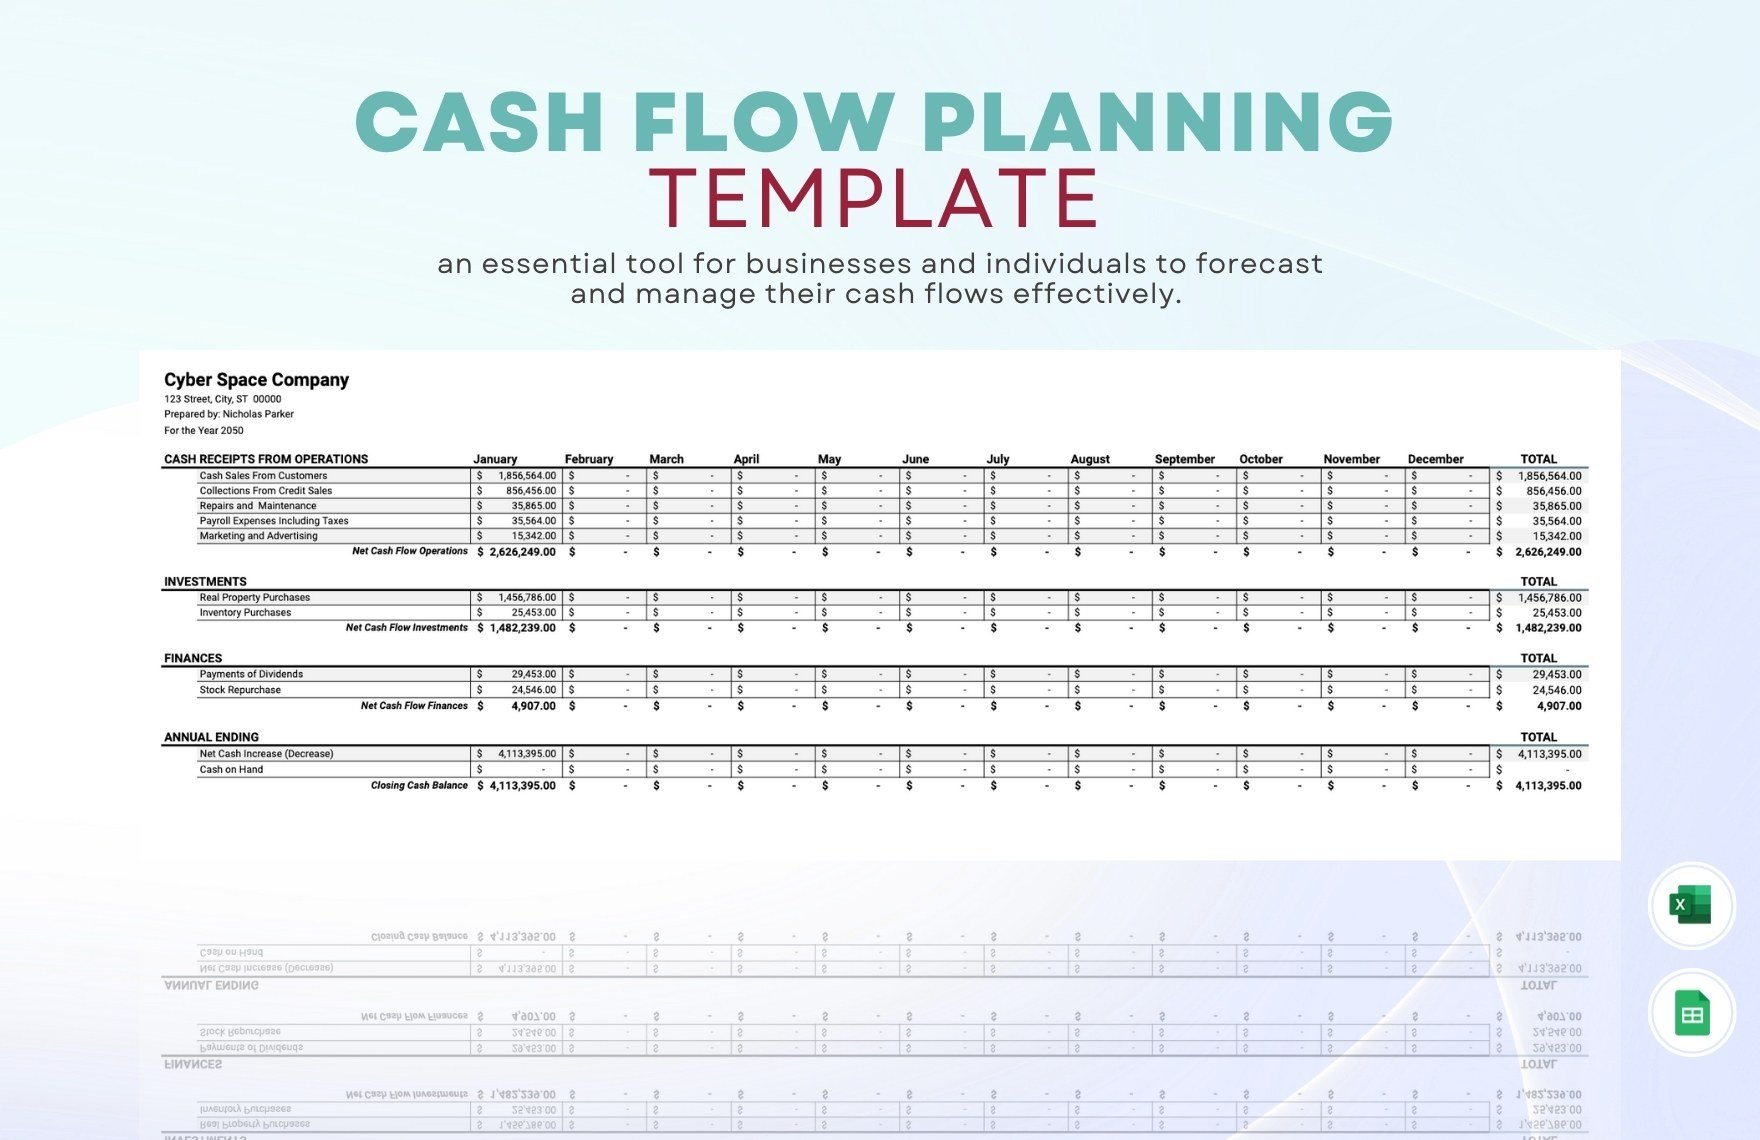 Cashflow Planning Template in Excel, Google Sheets